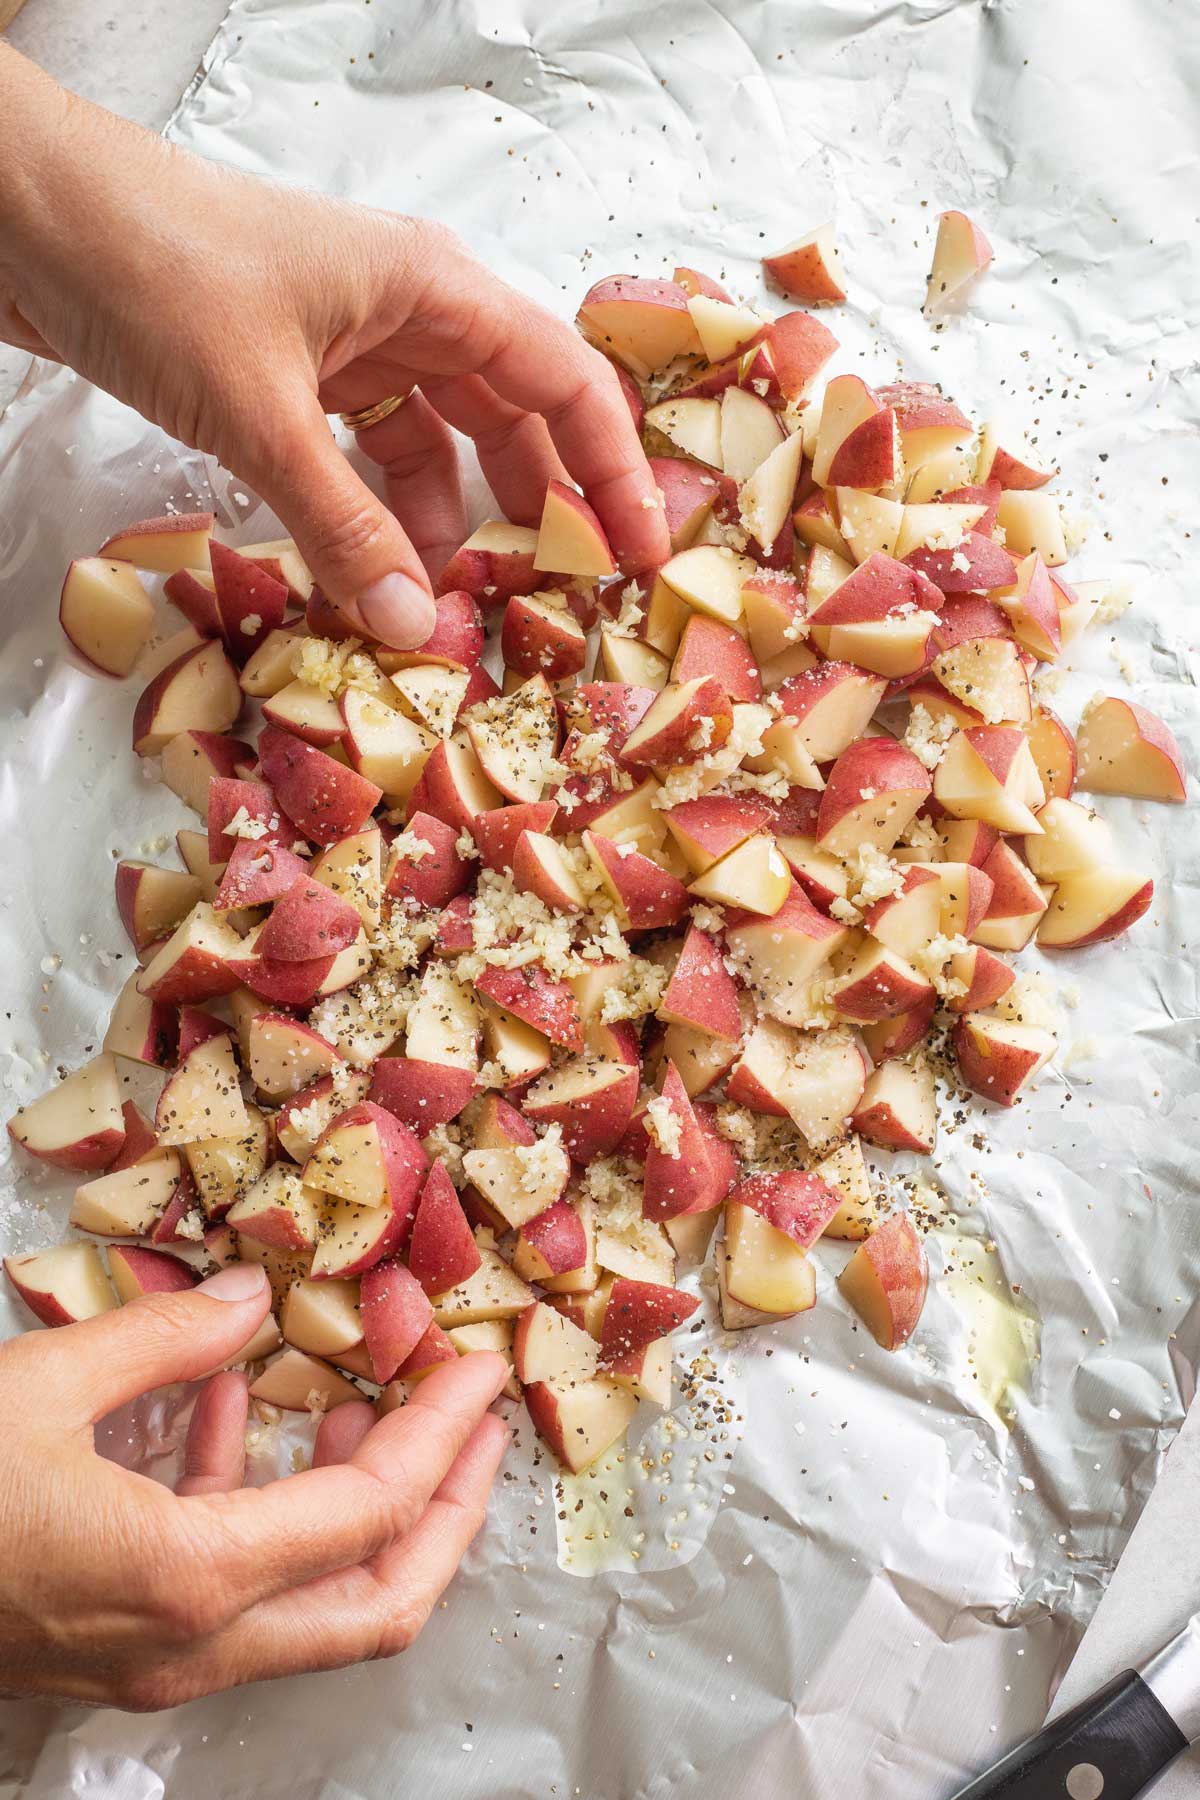 Two hands tossing potatoes with other ingredients before grilling.